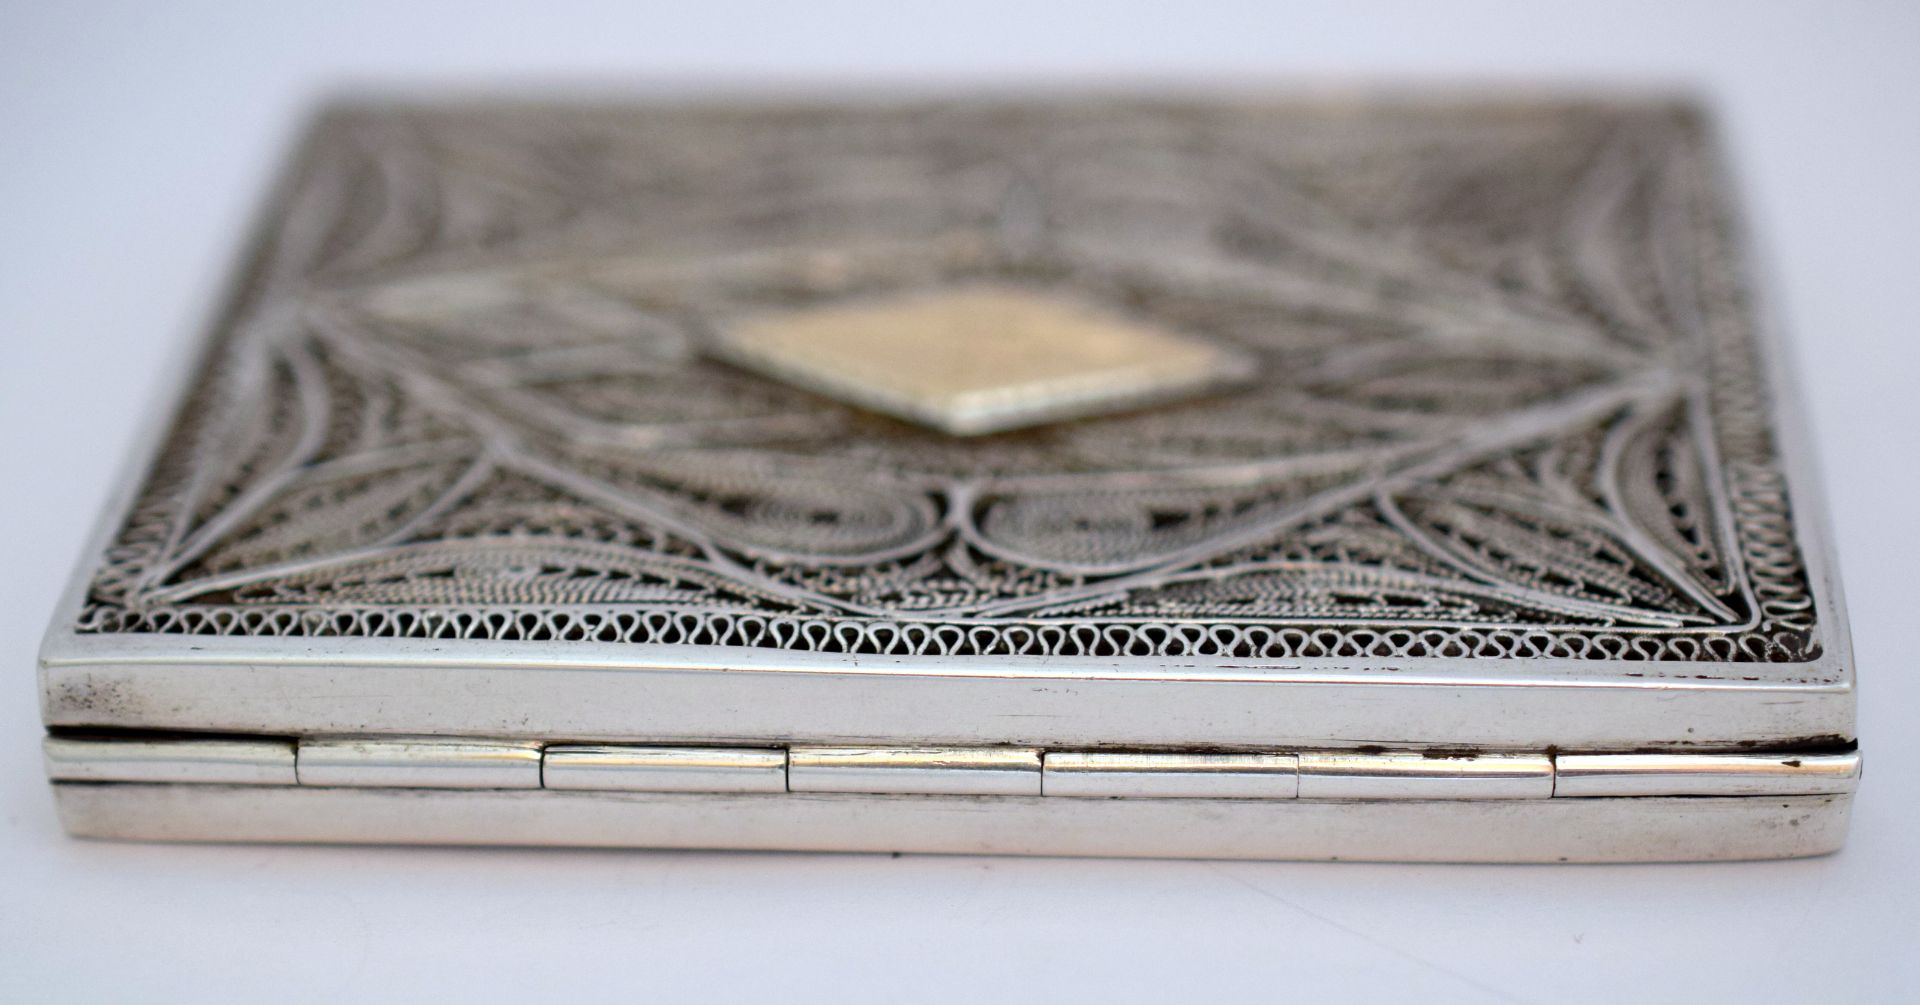 Solid Silver Gentleman's Business Card Holder With Gold Feature c1930s - Image 8 of 8